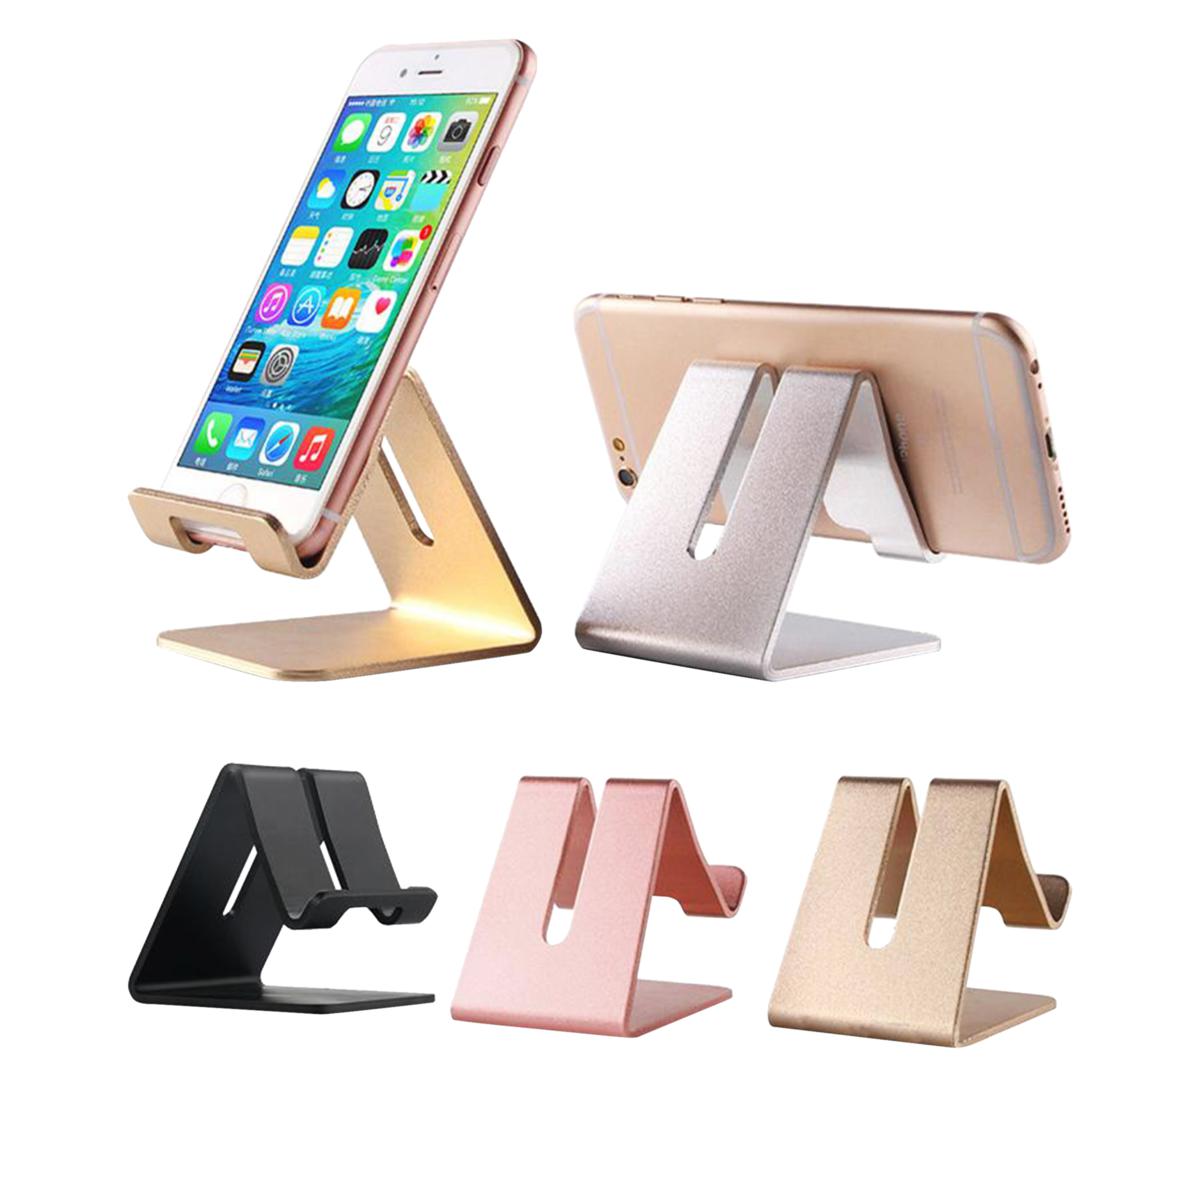 Aluminum Phone Stand - 2 Pack Black and Gold